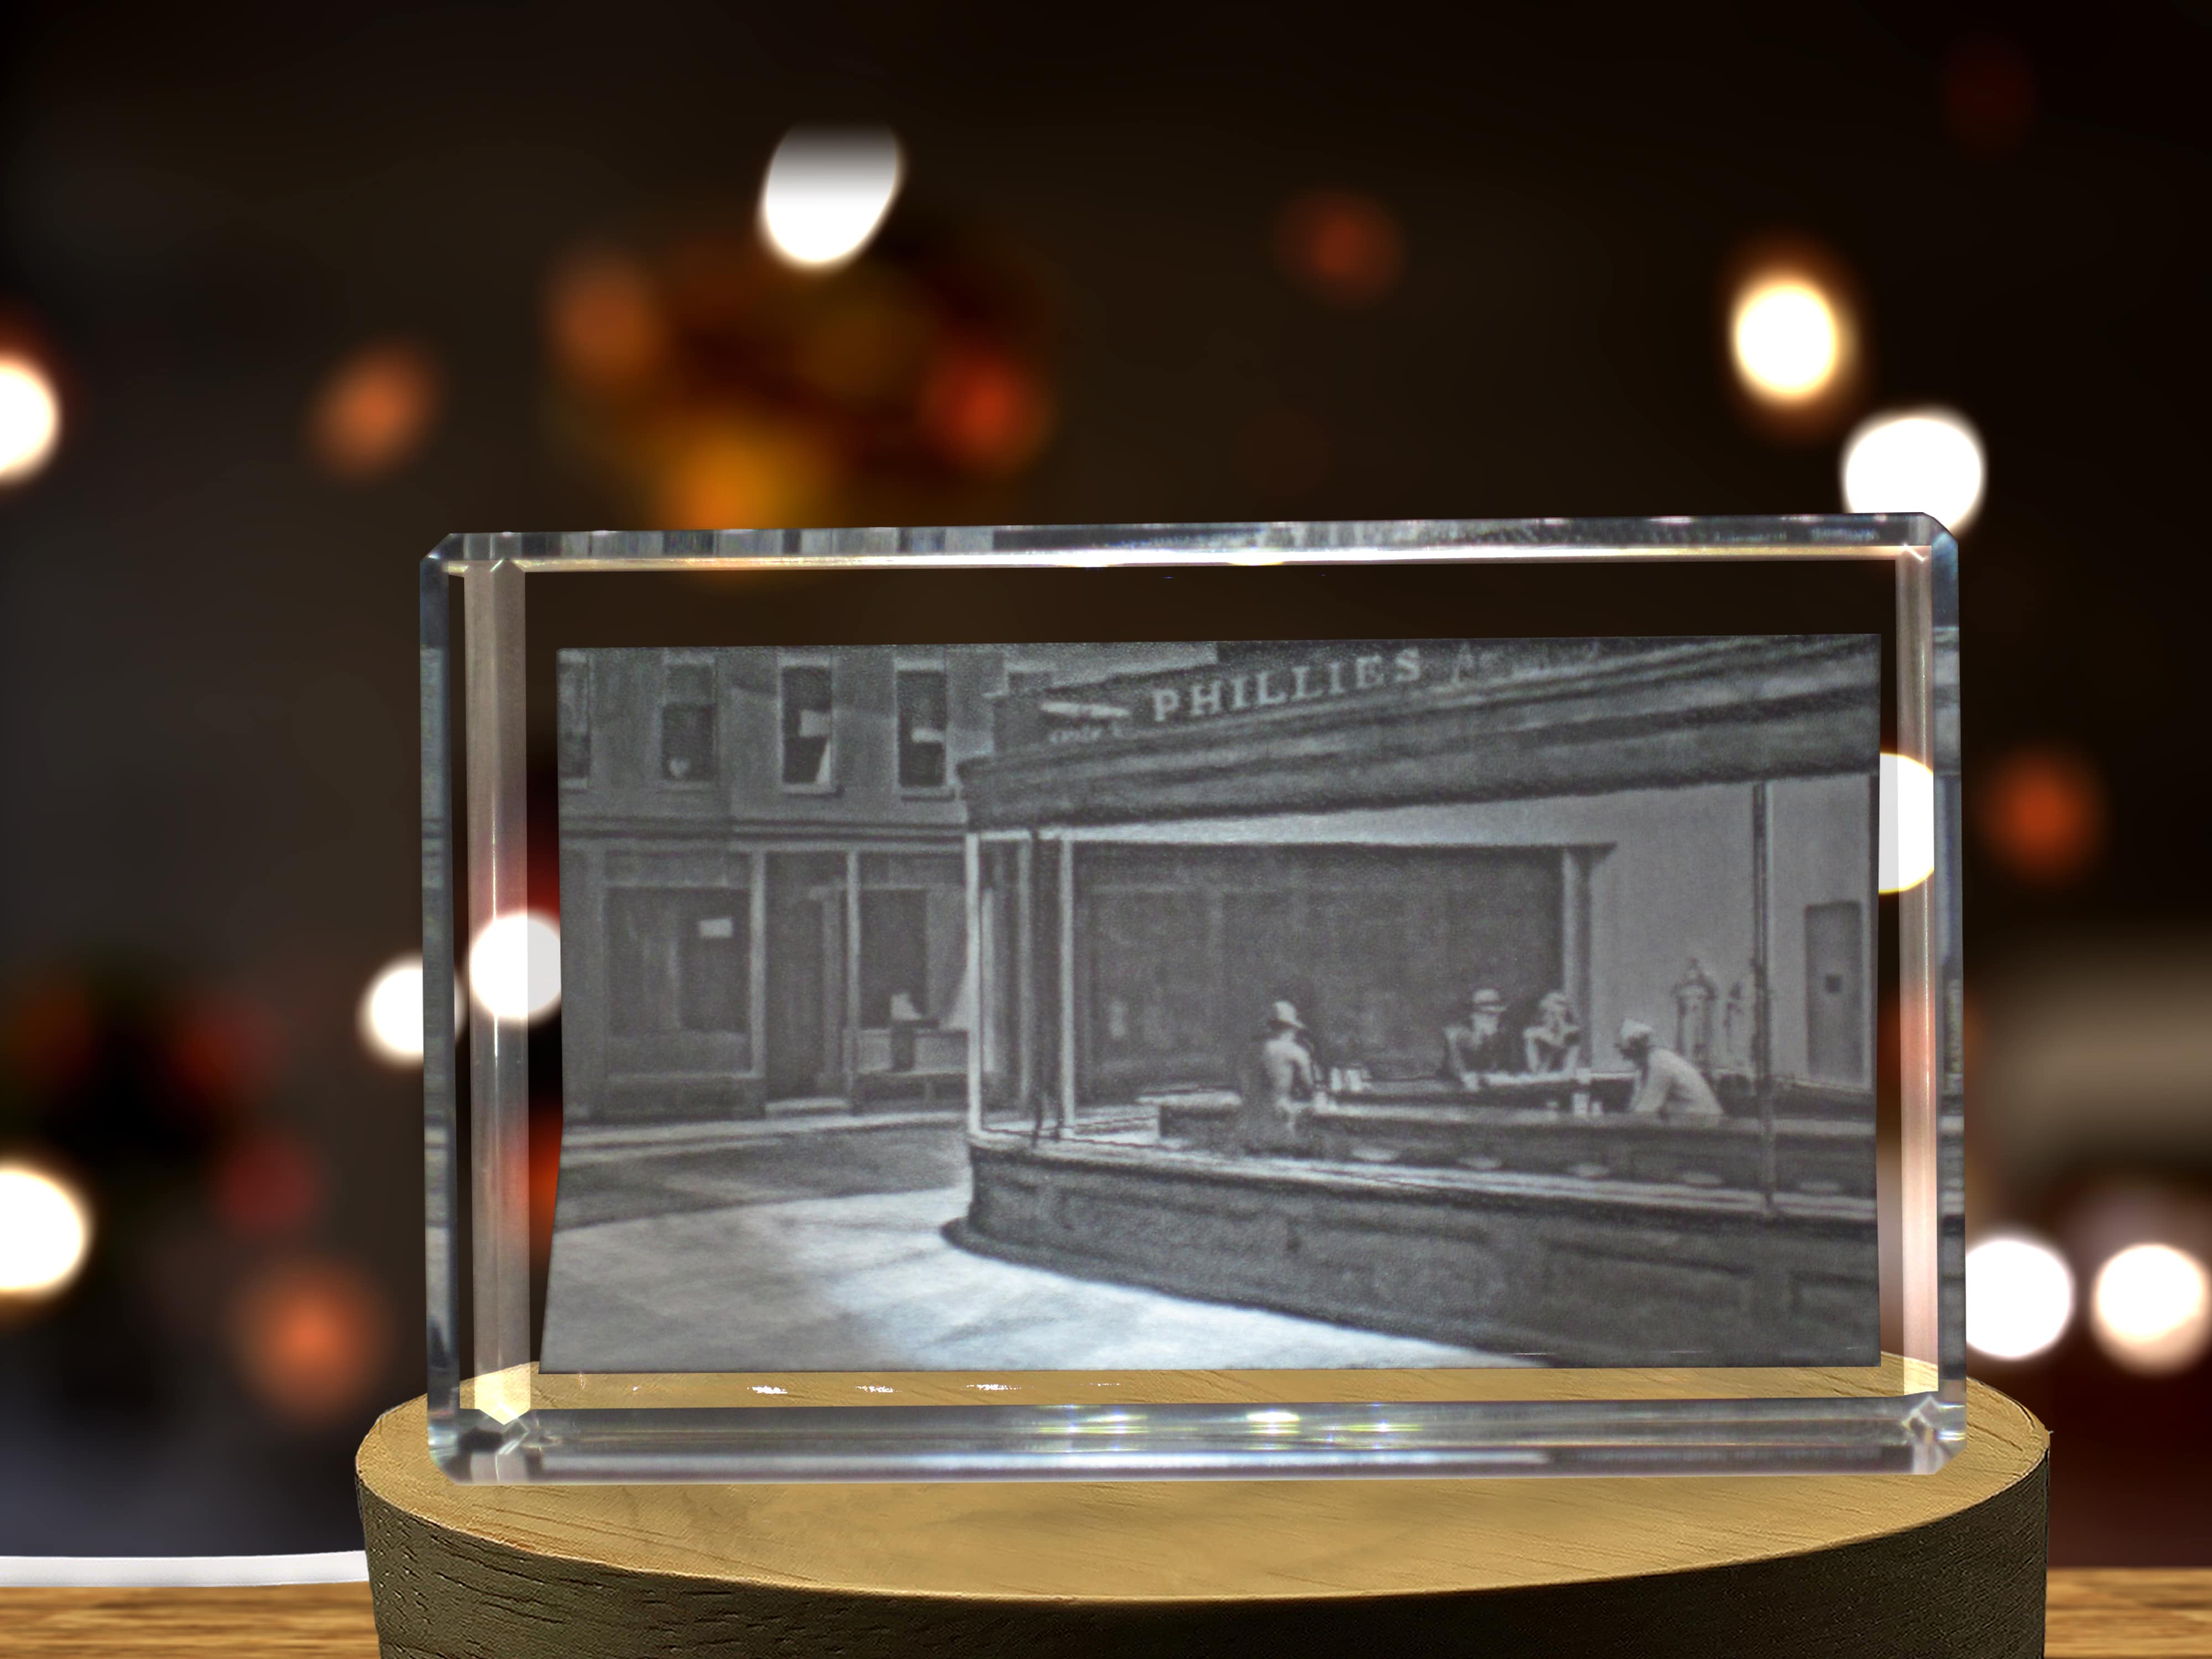 Nighthawks 3D Engraved Crystal Keepsake - Made in Canada, Unique Design, LED Base Included A&B Crystal Collection